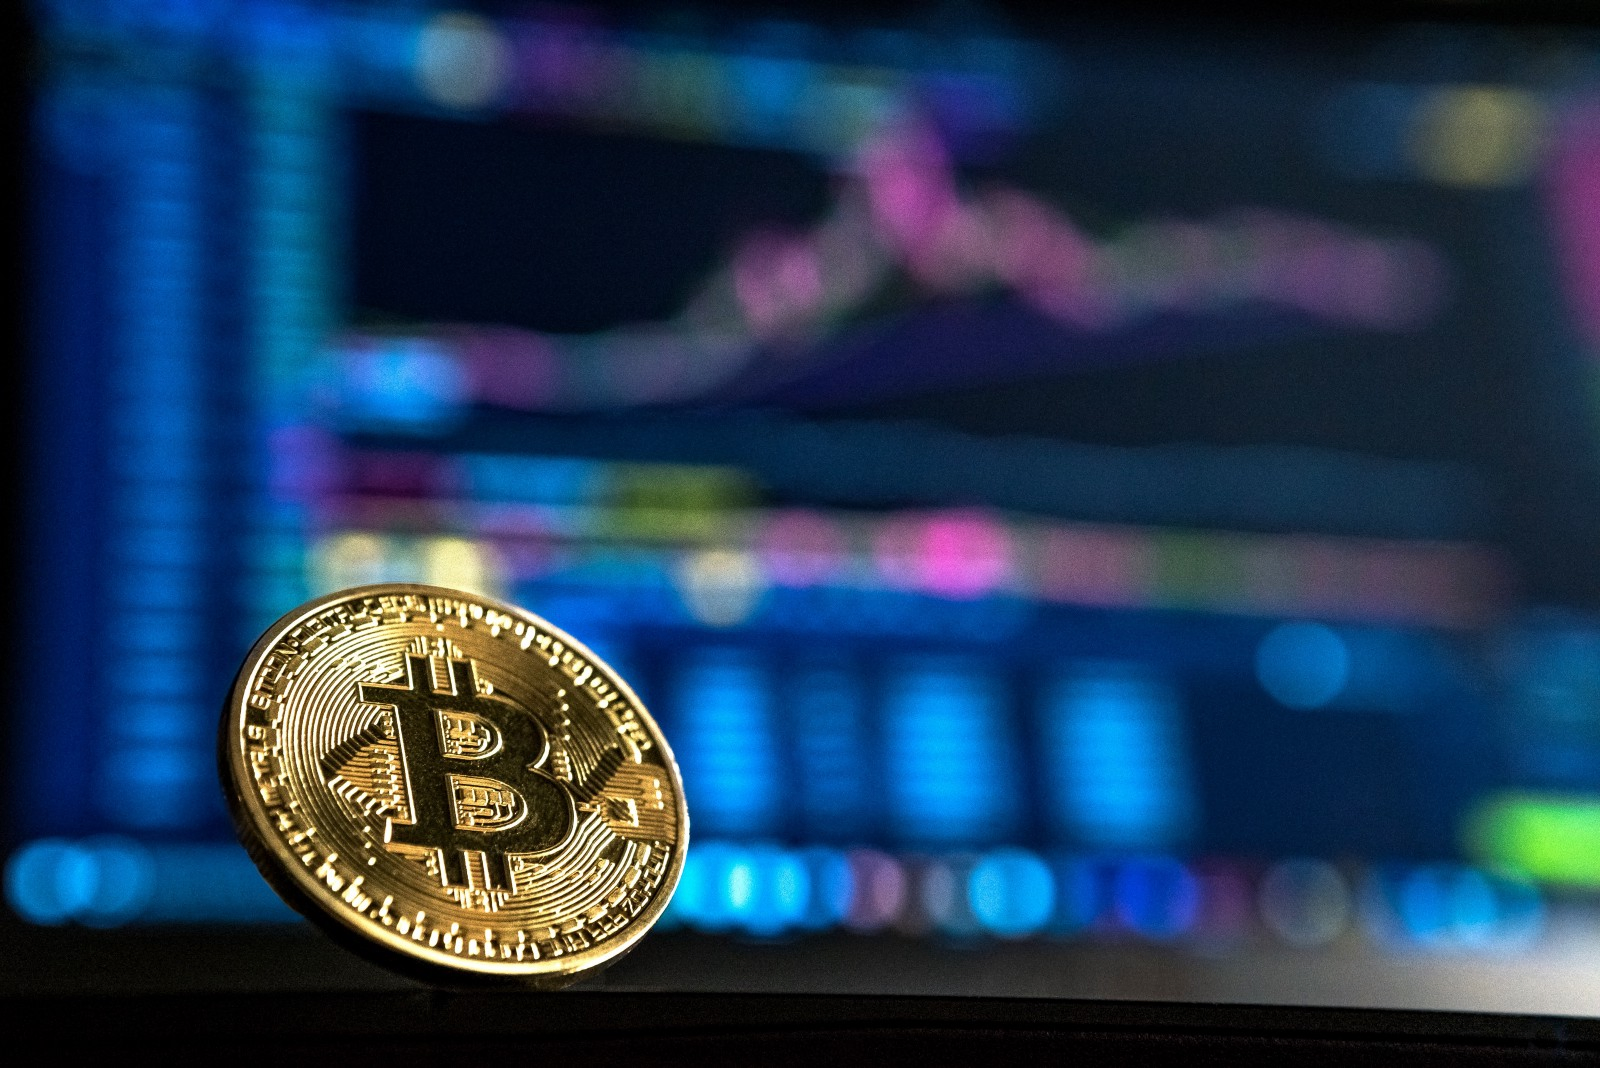 Top UK Cryptocurrency Exchanges of 2019